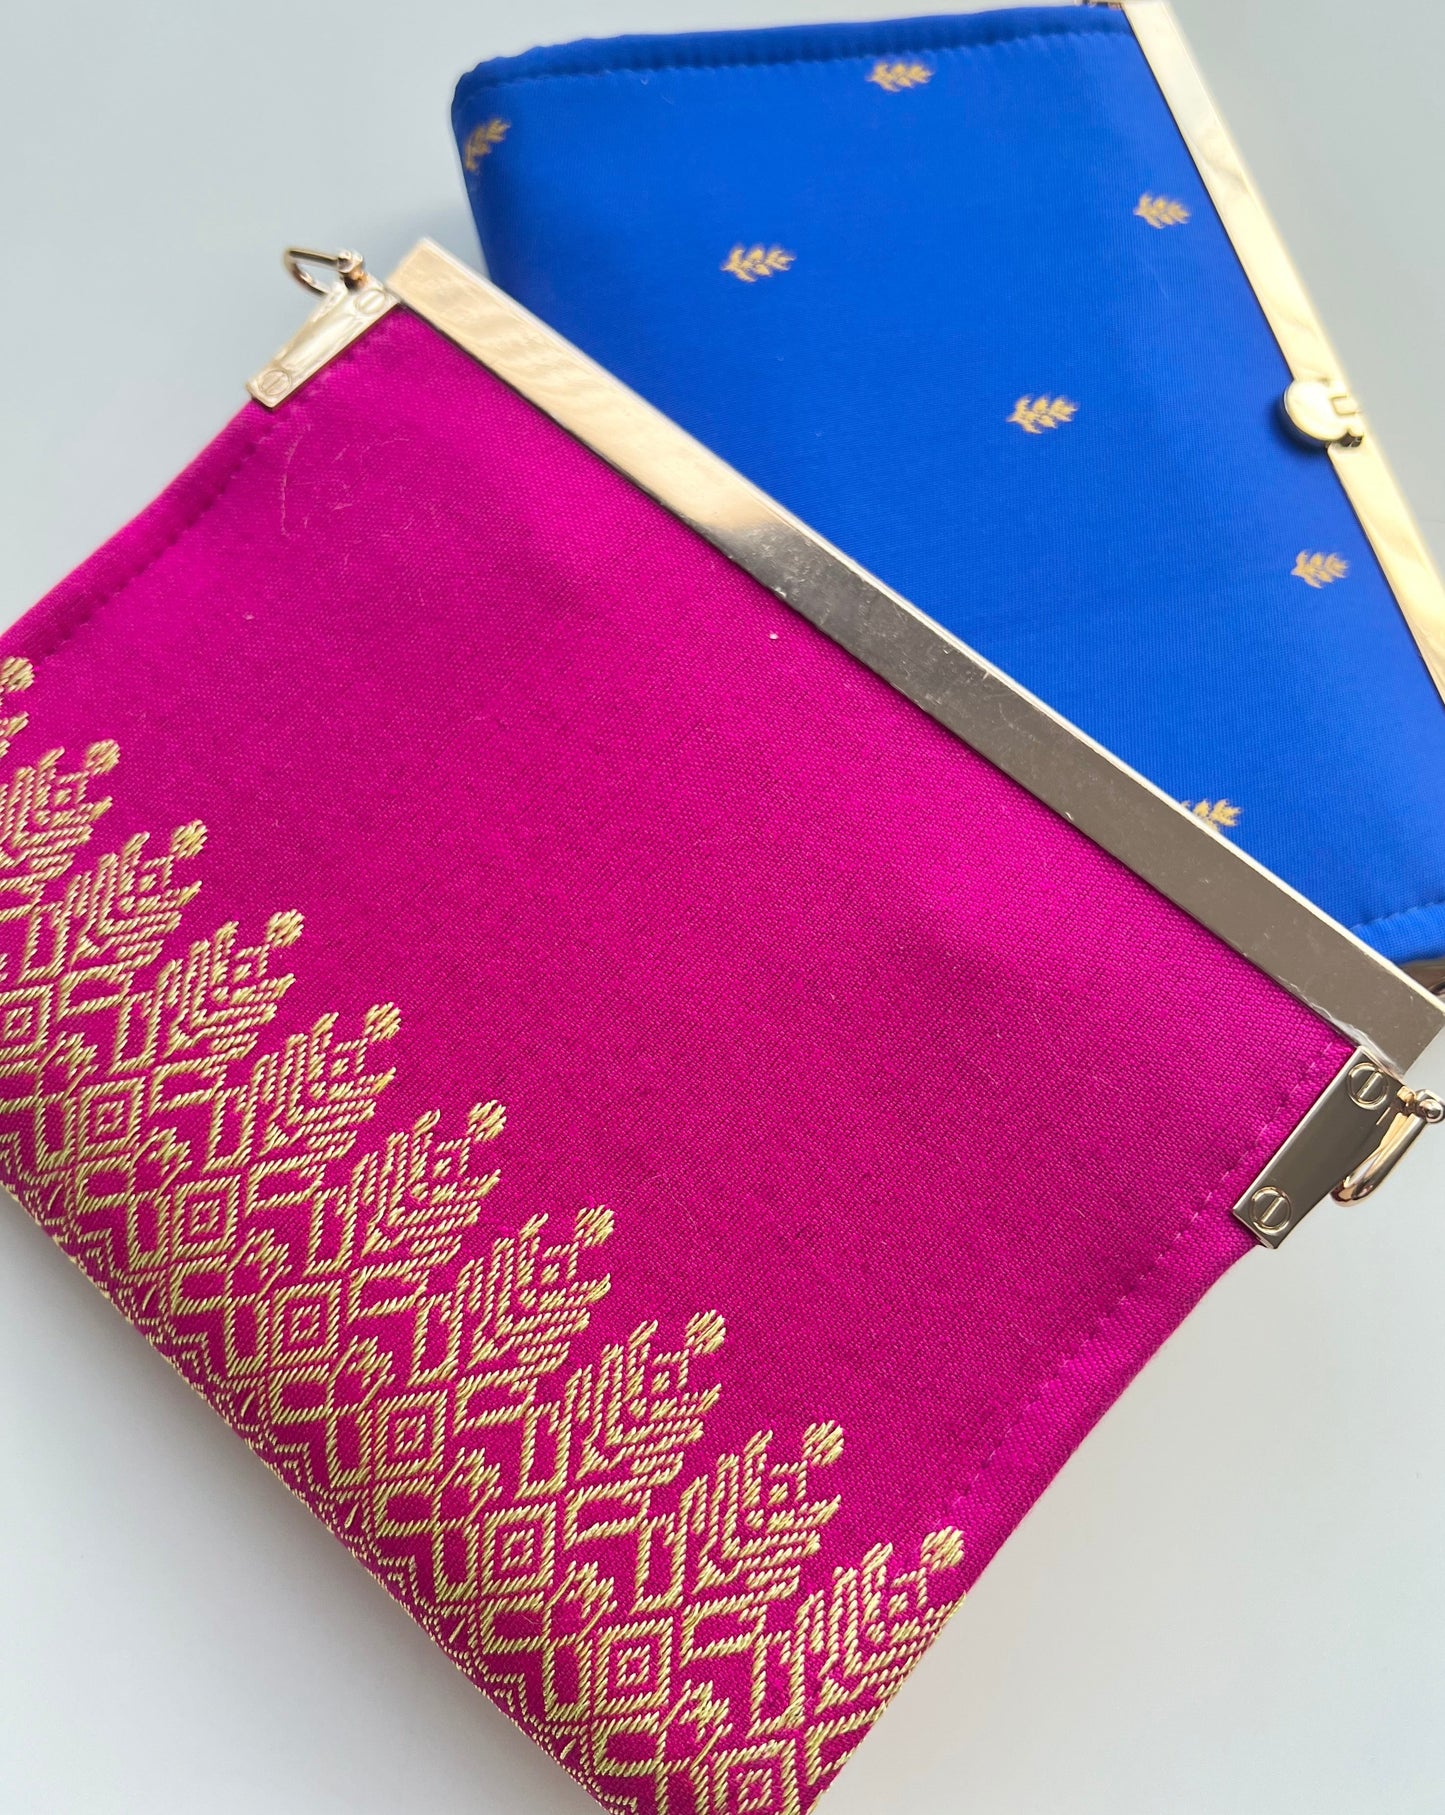 Purse/Clutch Vibrant Pink or Royal Blue